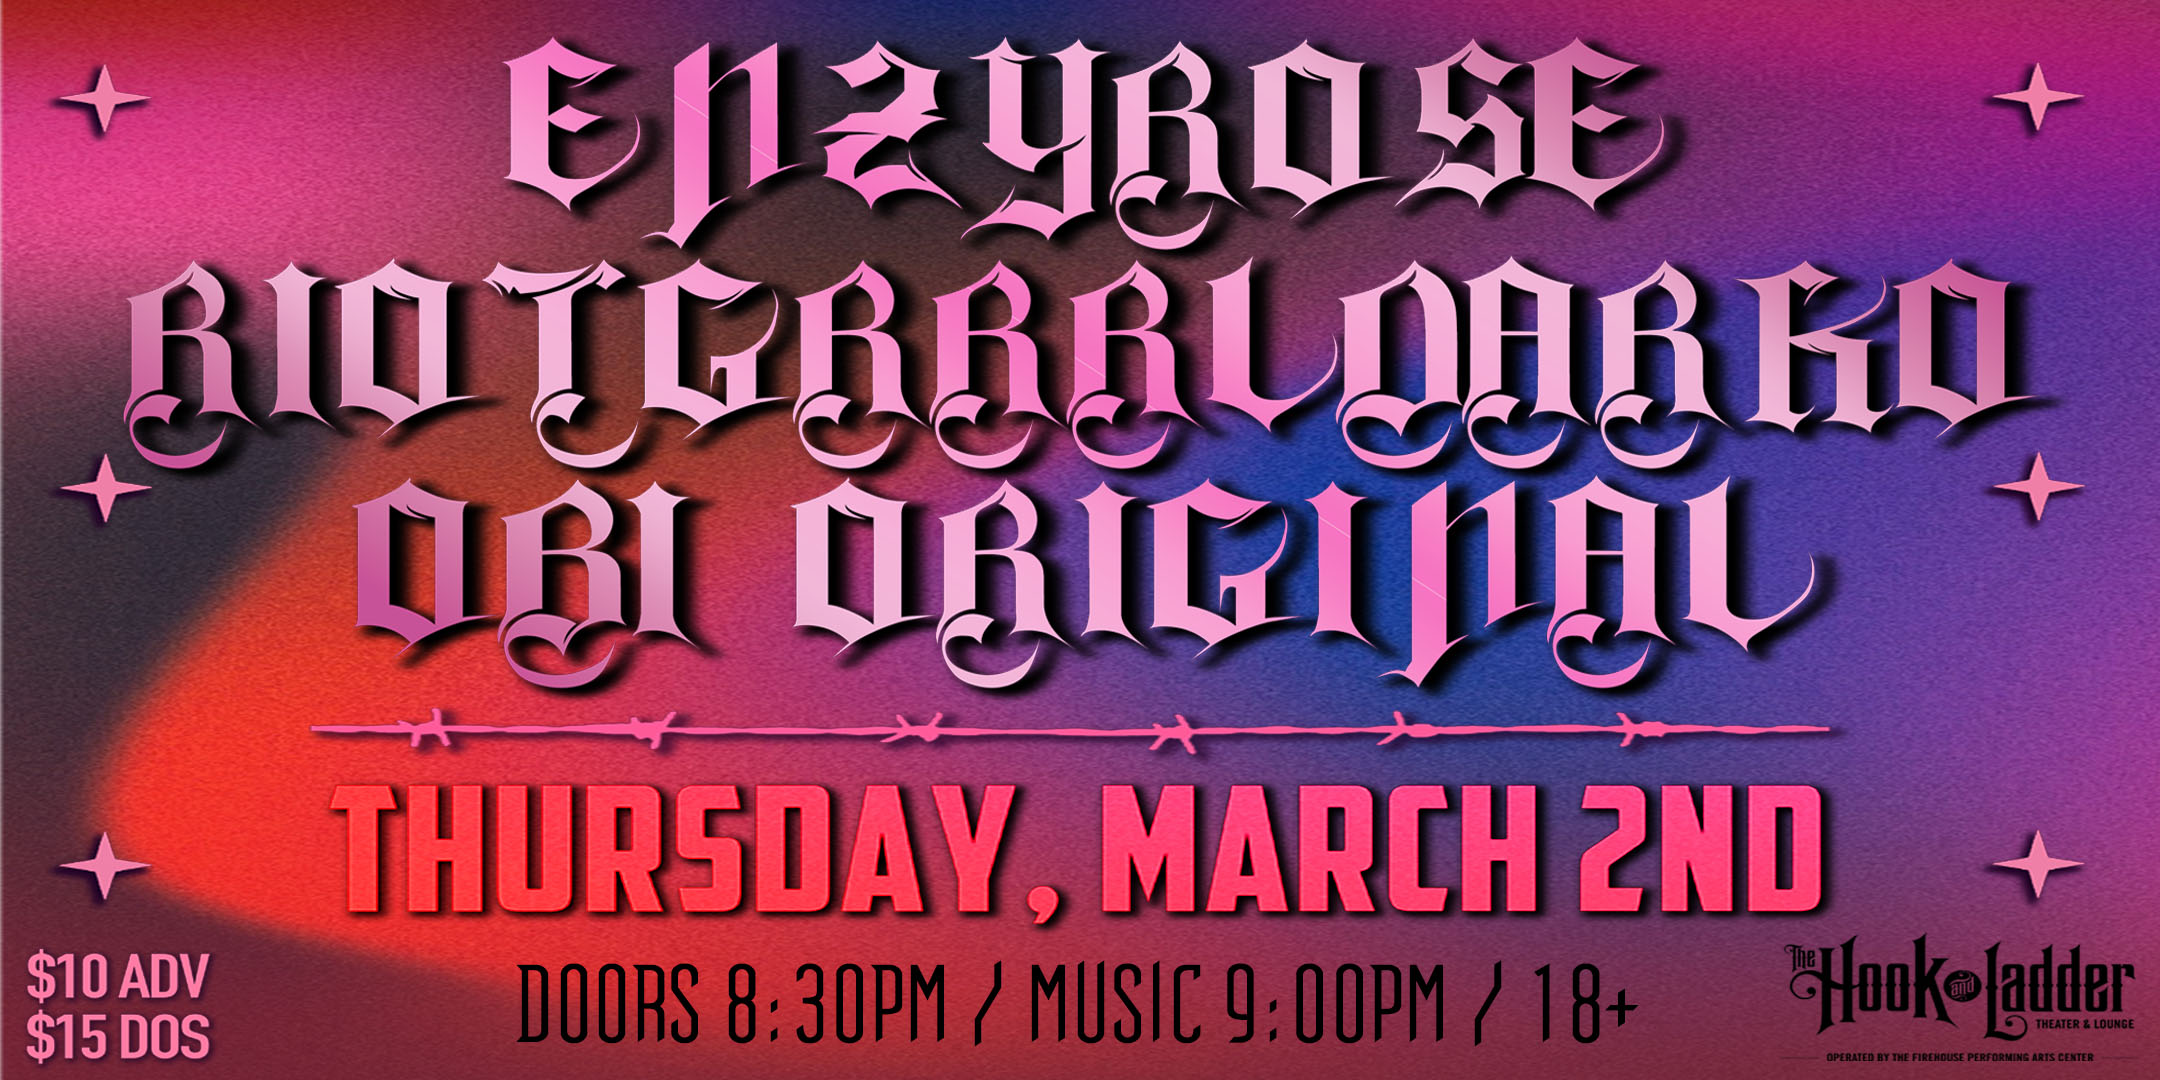 Enzyrose Obi Original Riotgrrrldarko Thursday March 2 The Hook and Ladder Theater Doors 8:30pm :: Music 9:00pm :: 18+ General Admission $10 ADV / $15 DOS NO REFUNDS